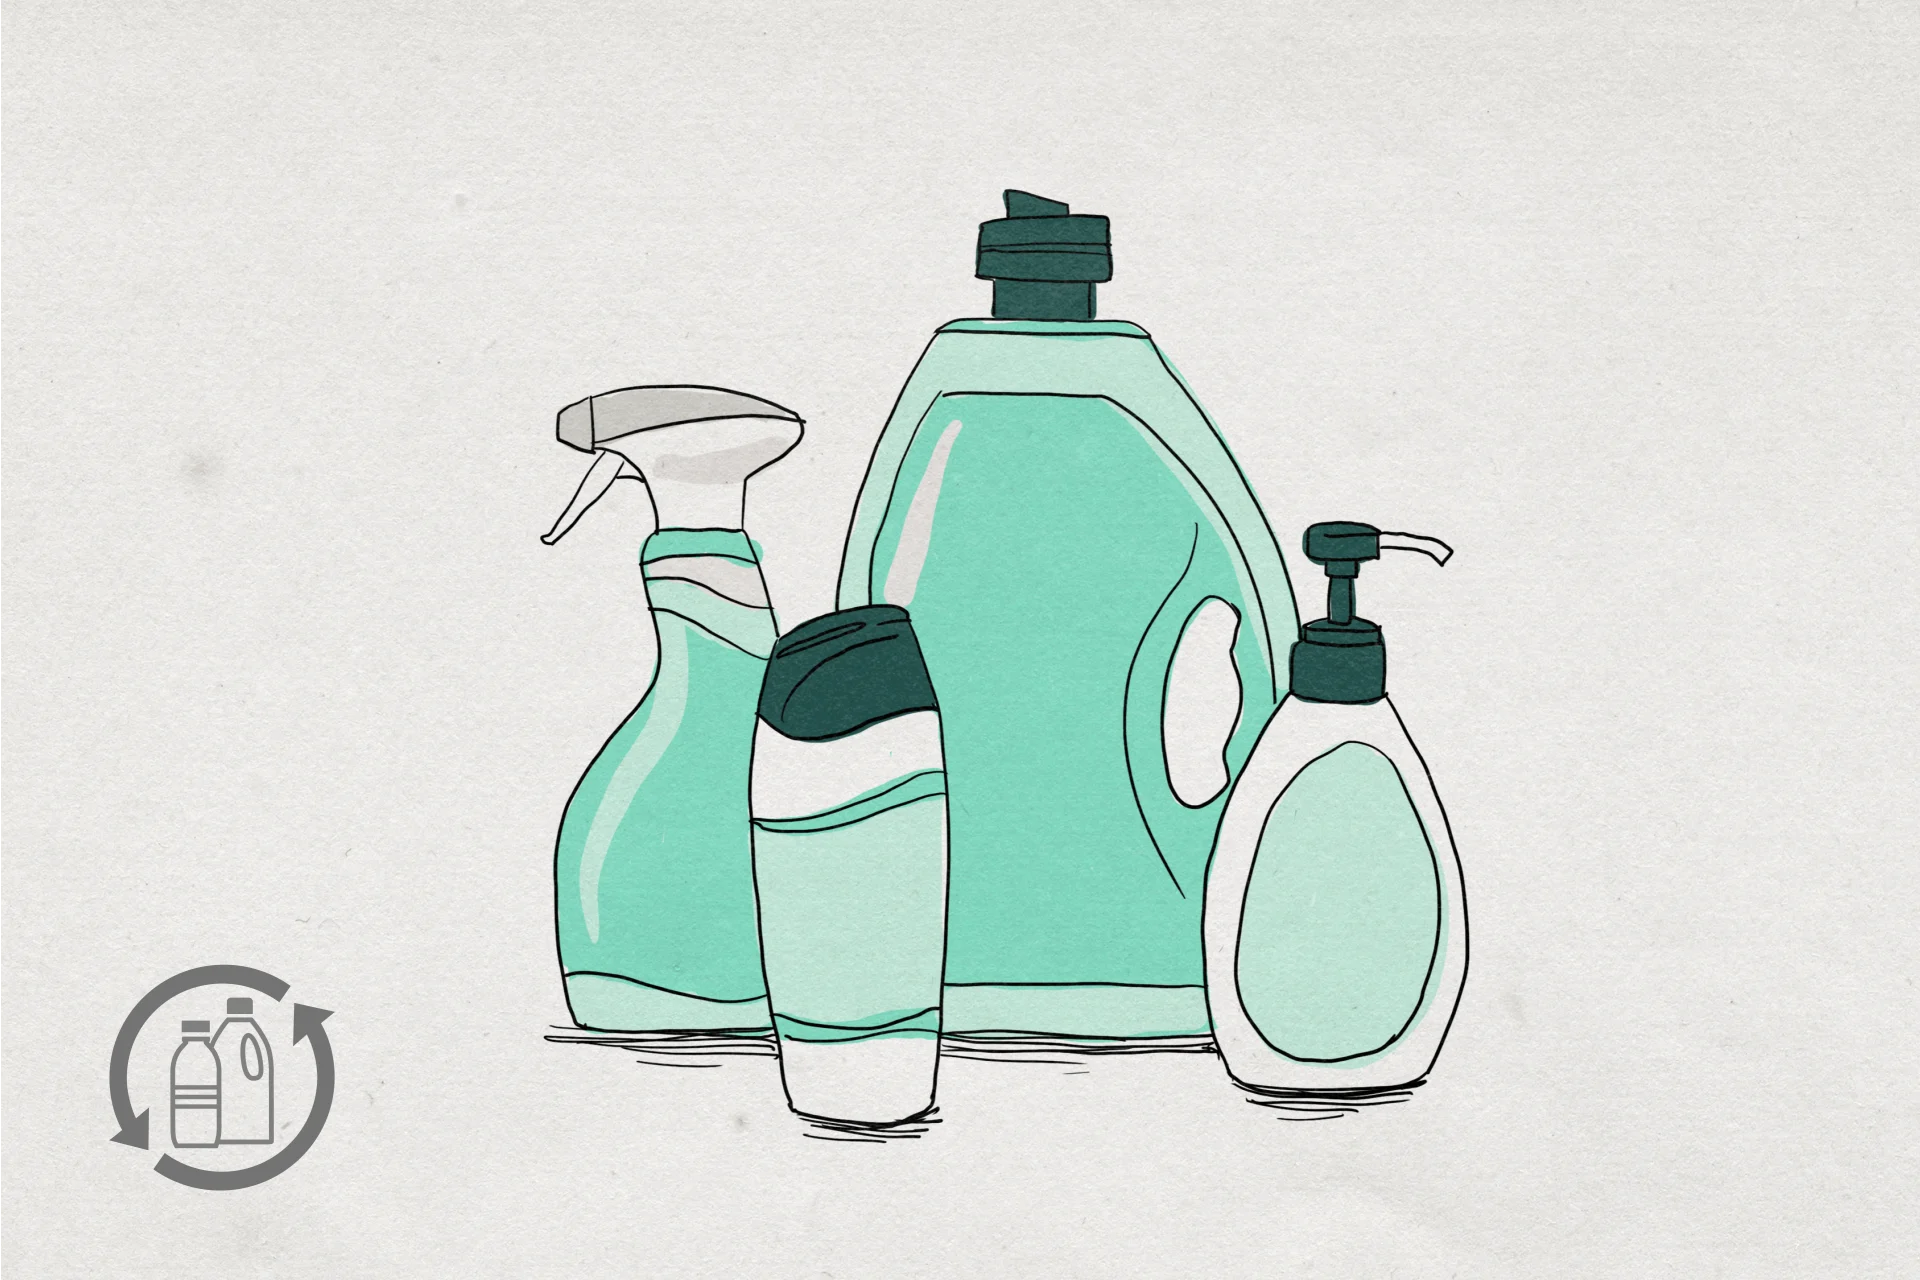 Illustration of empty plastic bottles that contained soap, shampoo, detergent and cleaning products